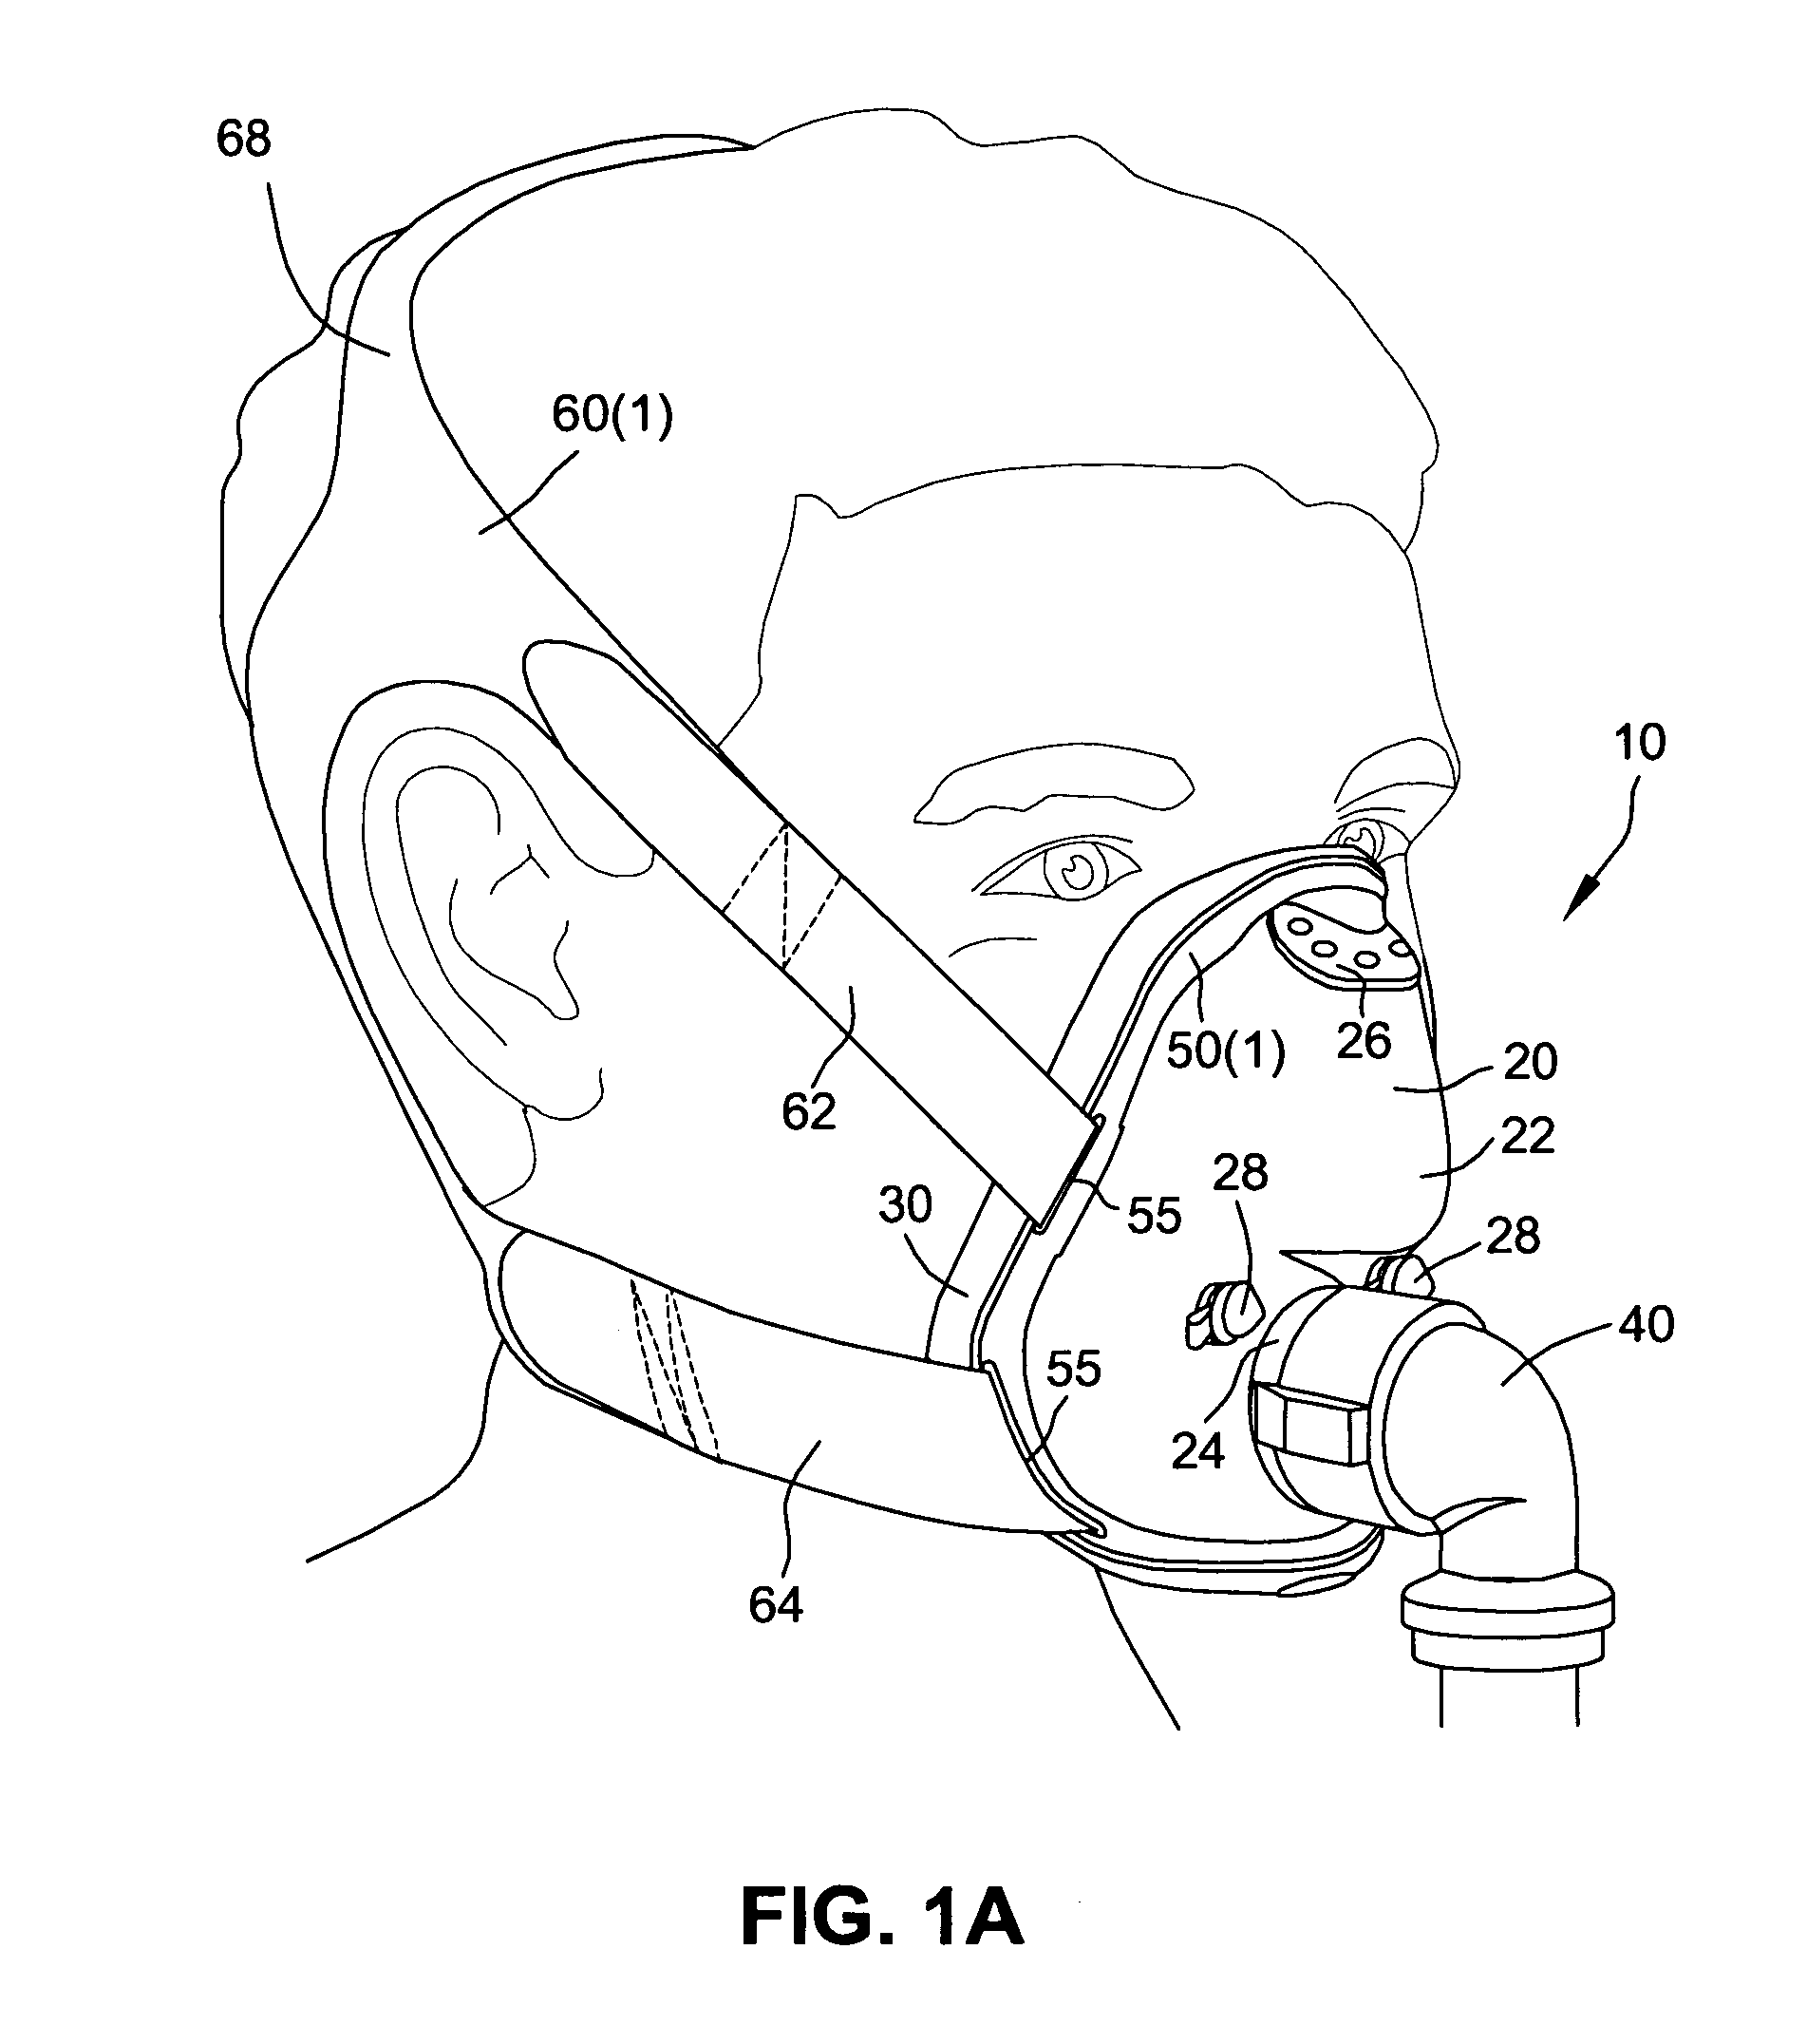 Mask system with interchangeable headgear connectors